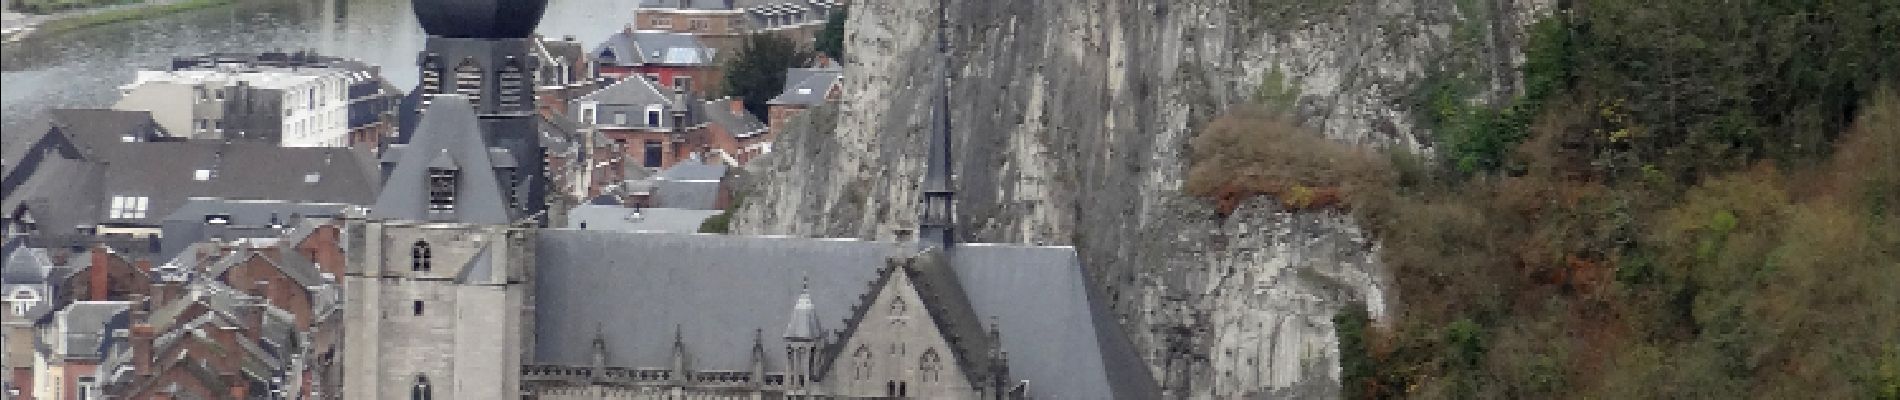 Tocht Stappen Dinant - RF-Na-09 Dinant Petite-boucle - Photo